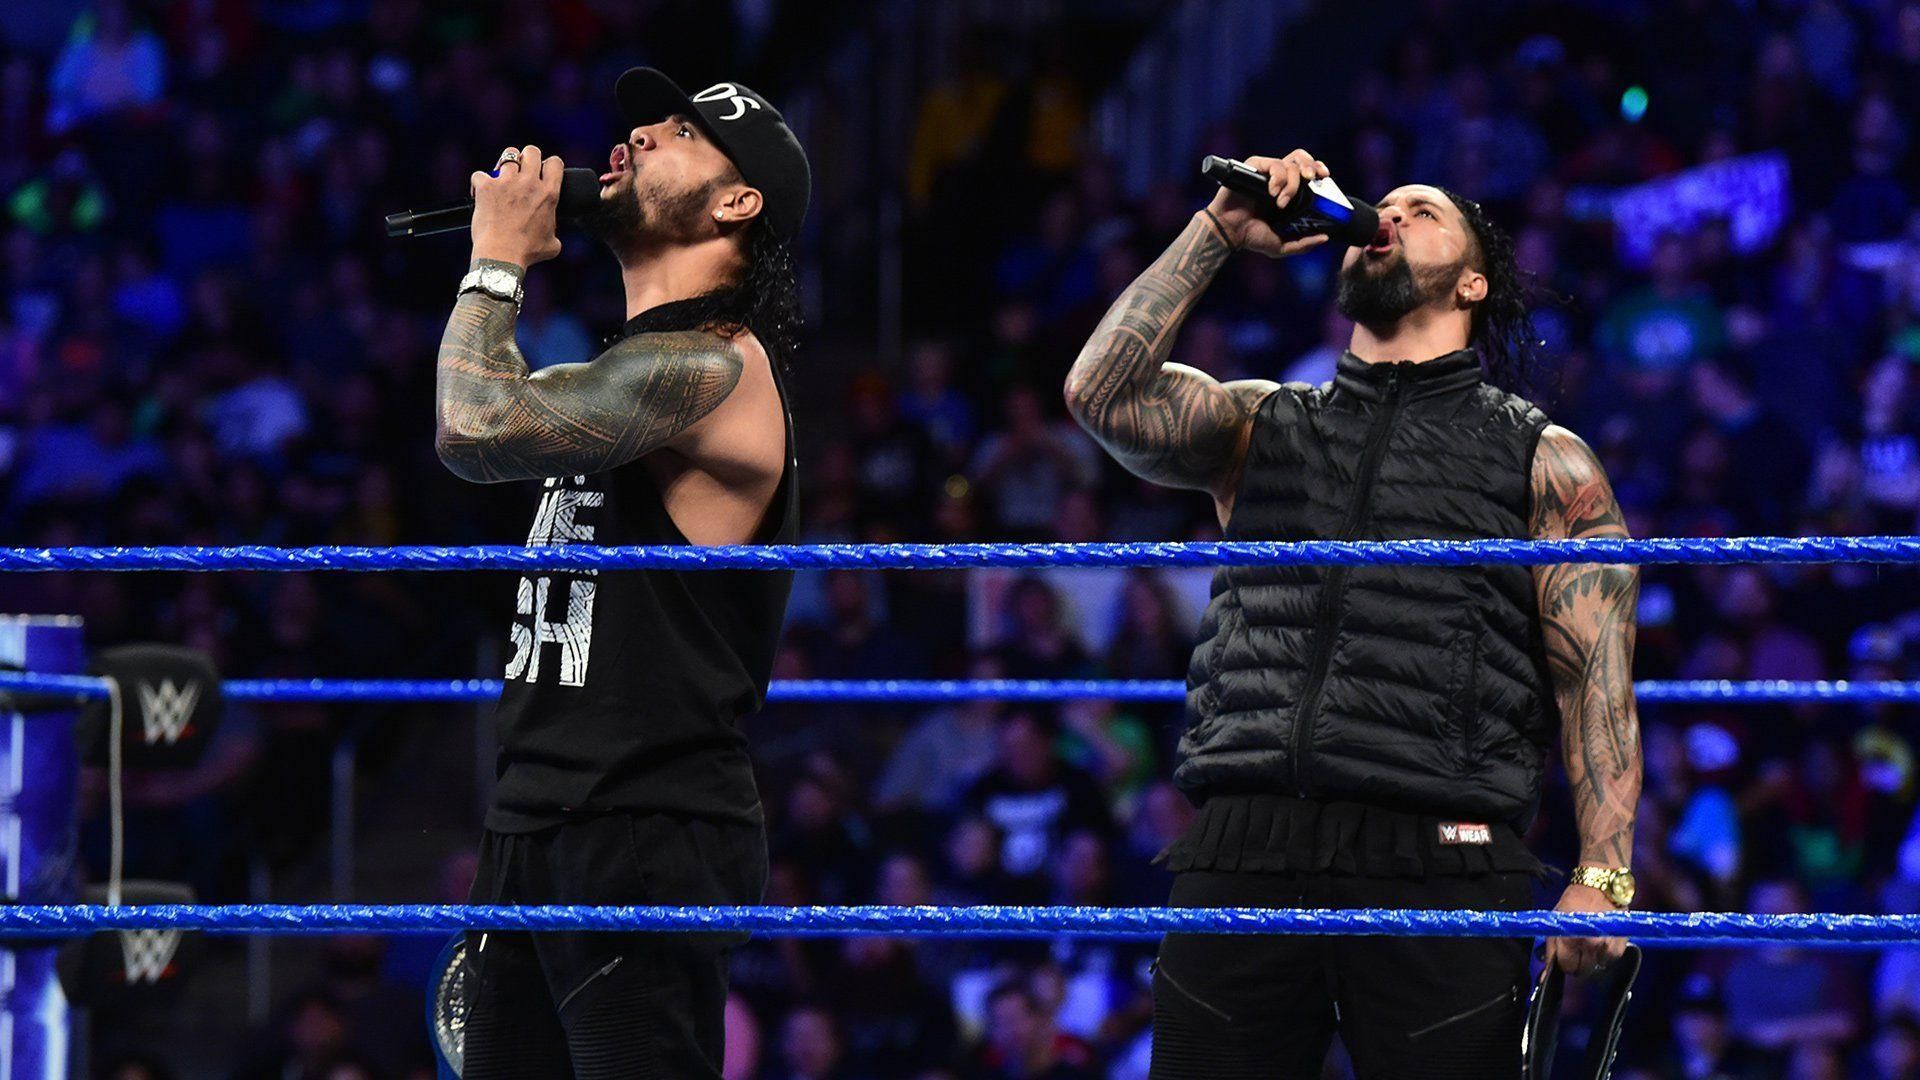 The Usos will face The Street Profits at SummerSlam 2022